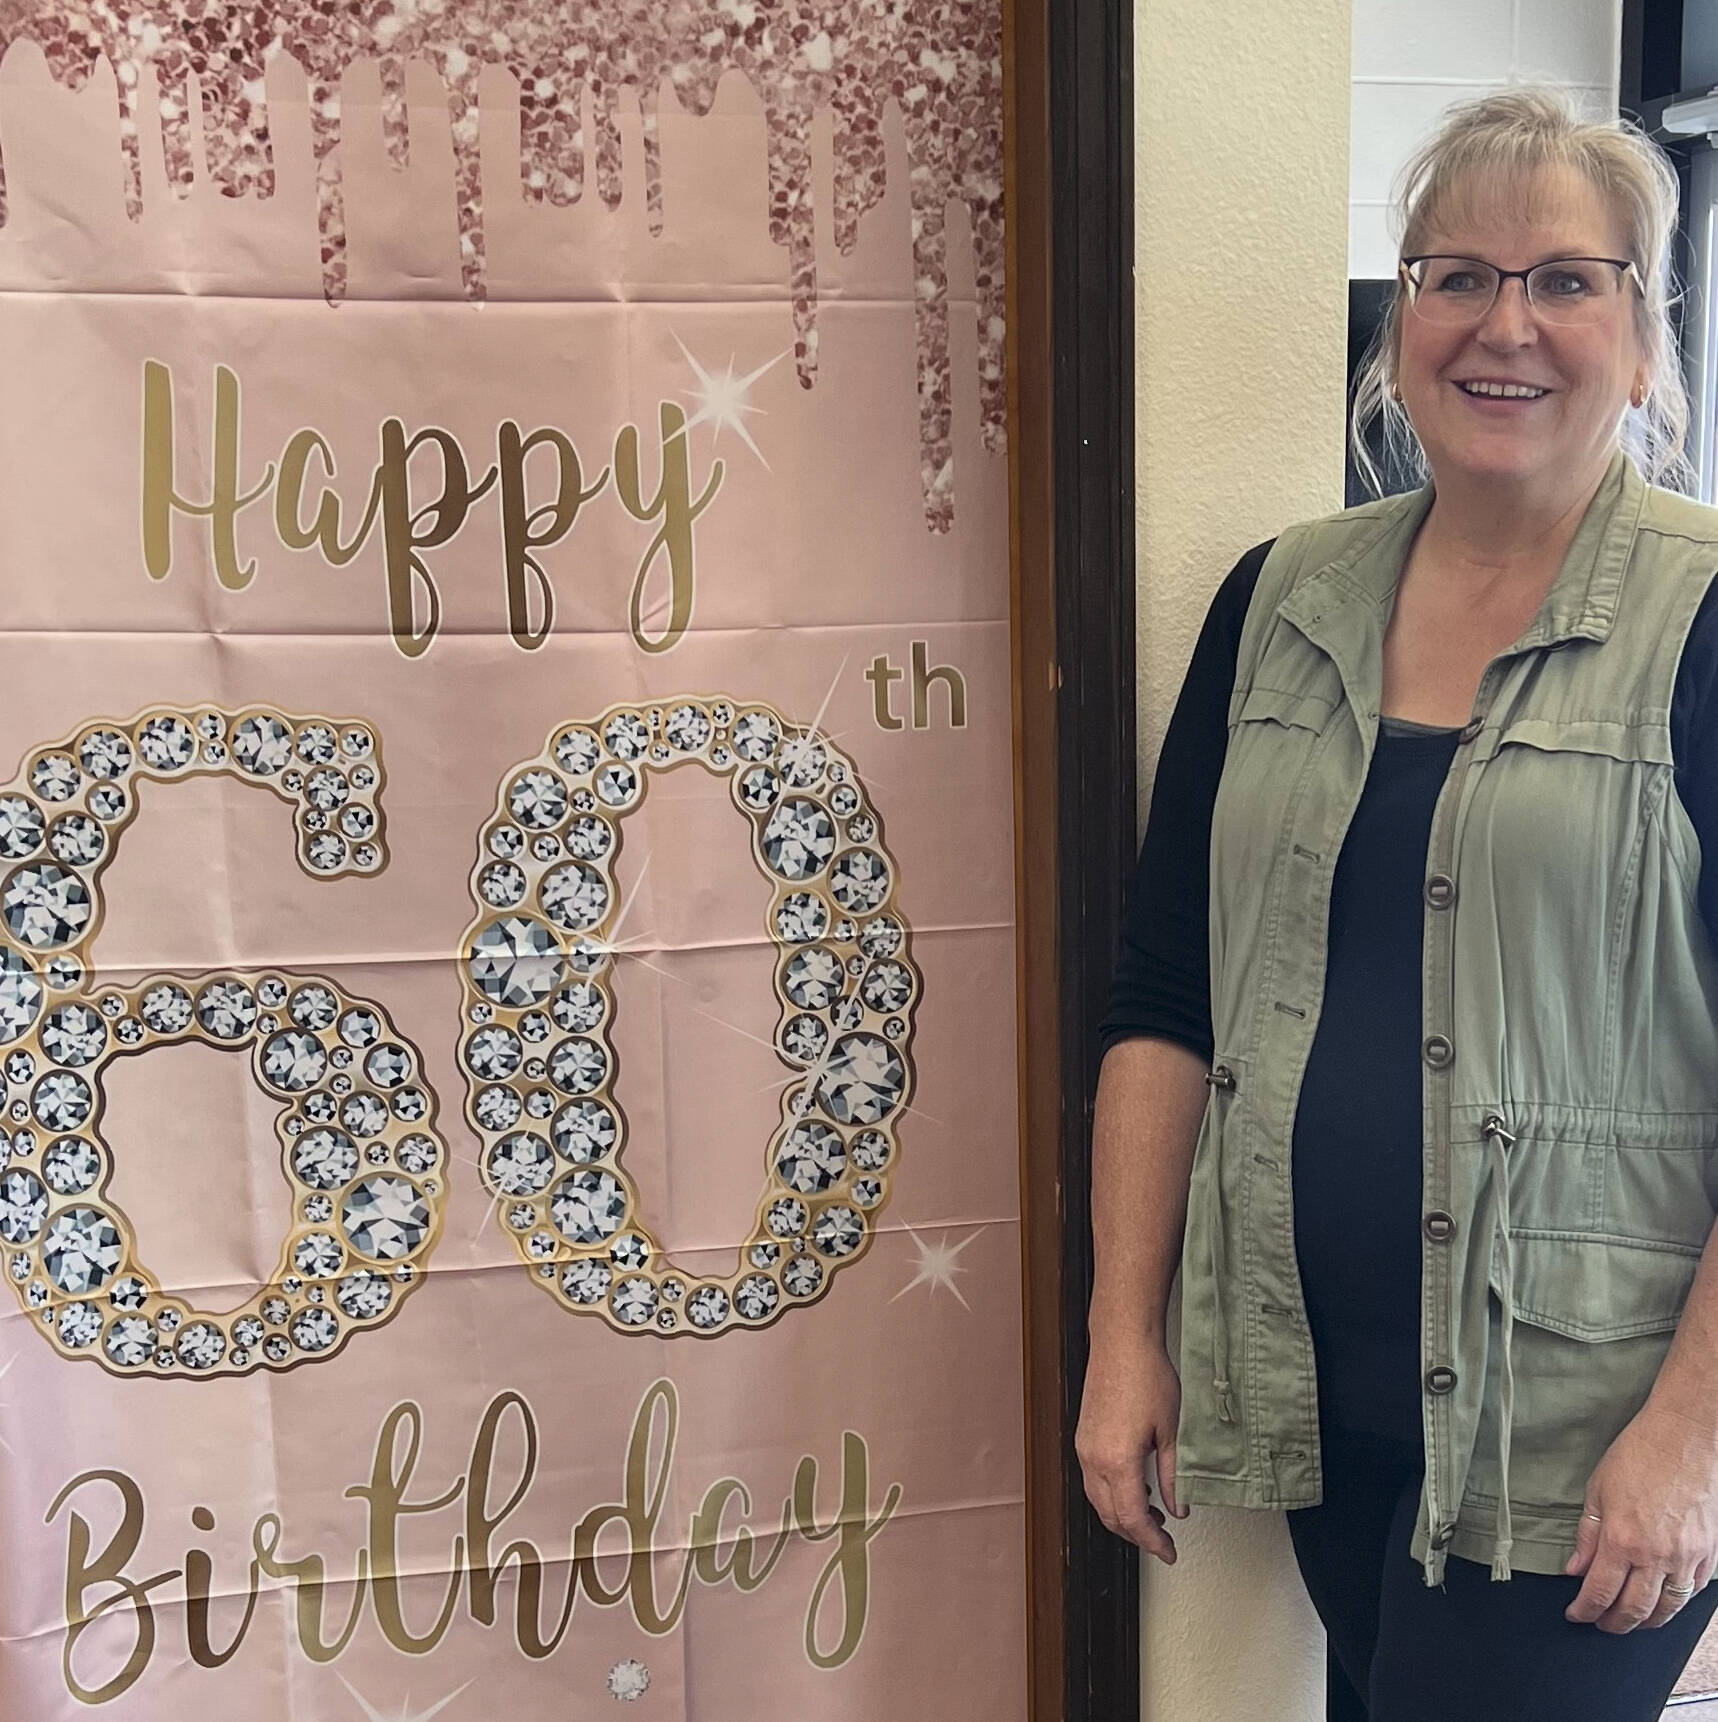 Not only did Laura Huling turn 60 years old on Oct. 17, but she is also retiring from the Forks Post Office on Oct. 28.
<em>Submitted Photo</em>